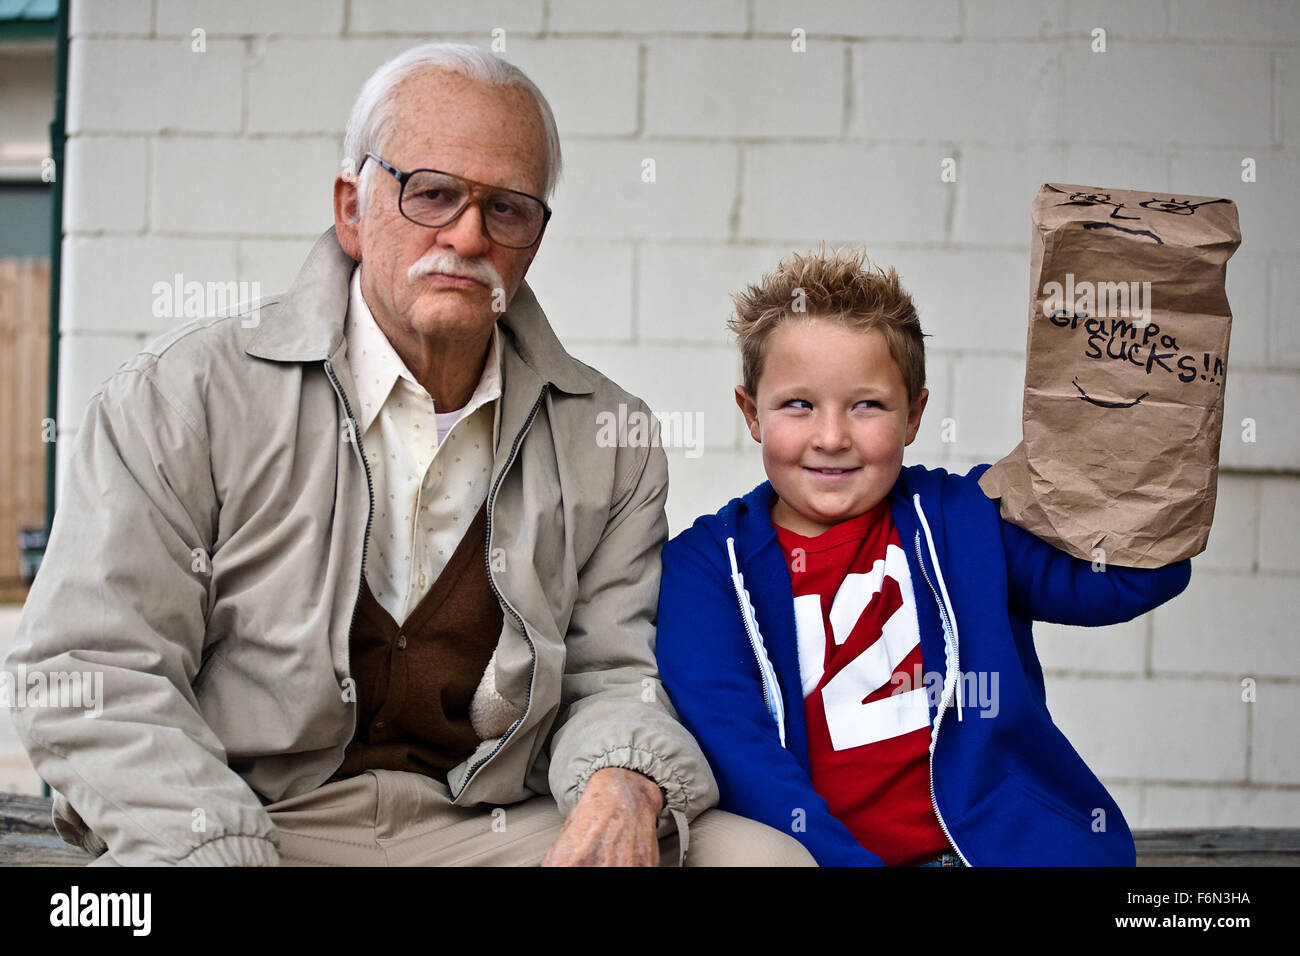 RELEASE DATE: October 25, 2013 TITLE: Jackass Presents: Bad Grandpa STUDIO: Paramount Pictures MTV Films DIRECTOR: Jeff Tremaine PLOT: 86-year-old Irving Zisman takes a trip from Nebraska to North Carolina to take his 8 year-old grandson, Billy, back to his real father PICTURED: JOHNNY KNOXVILLE as Irving Zisman and JACKSON NICOLL as Billy (Credit: c Paramount Pictures/Entertainment Pictures) Stock Photo